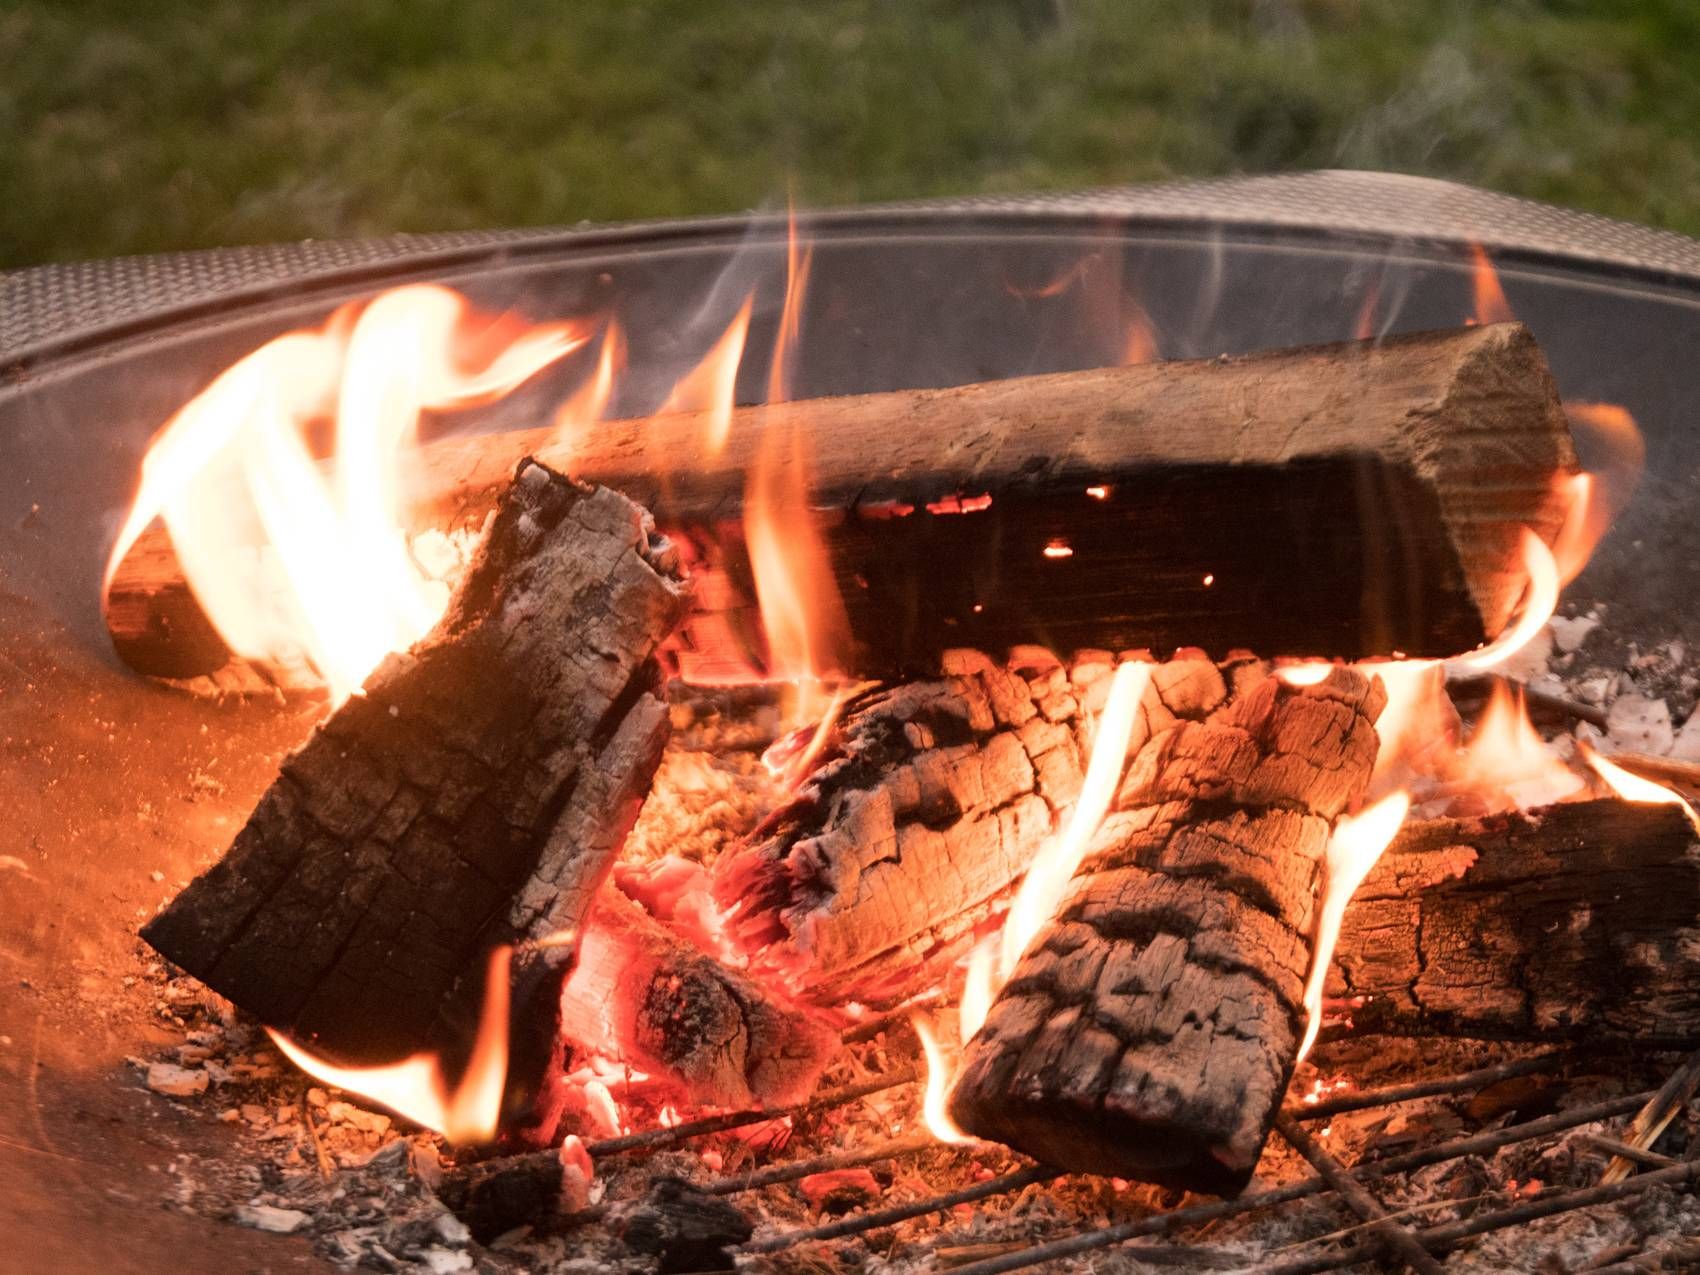 A reader worries about cough and sore throat when her neighbour lights up the  fire pit.